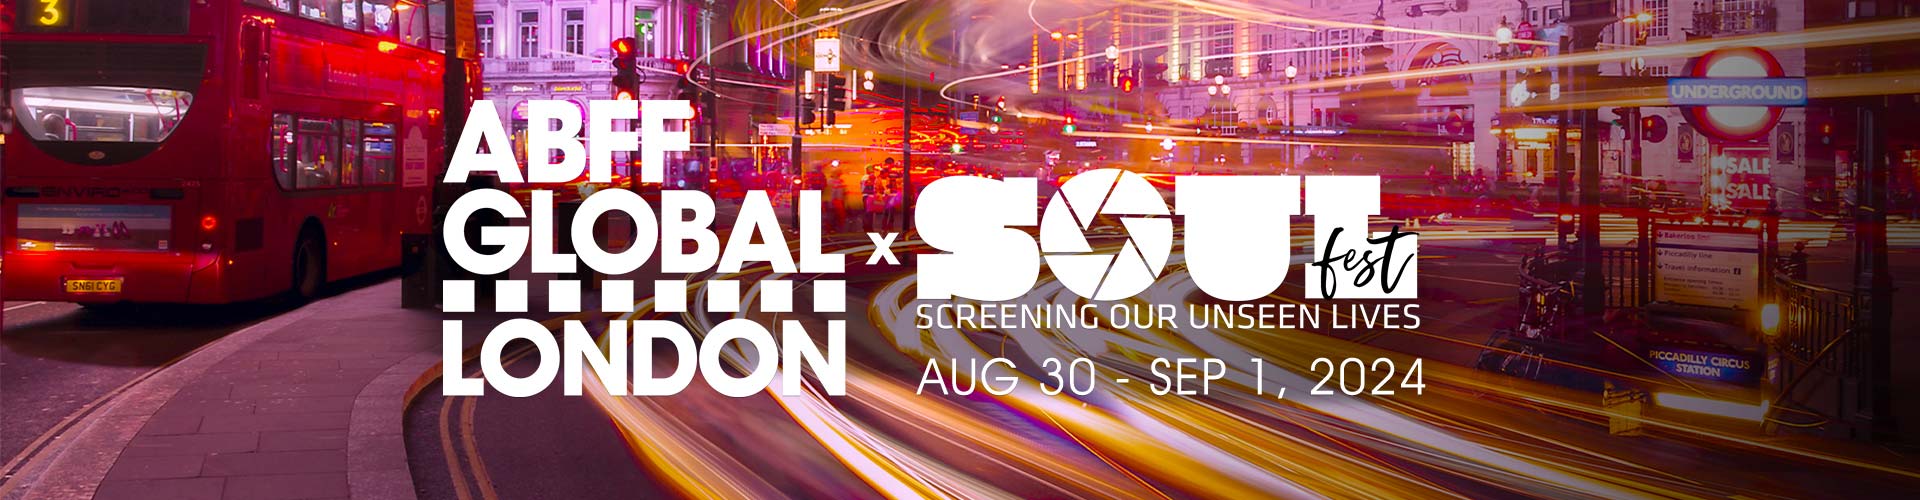 ABFF Global London x SOULfest - Screening our Unseen Lives - Aug 30 - Sep 1, 2024